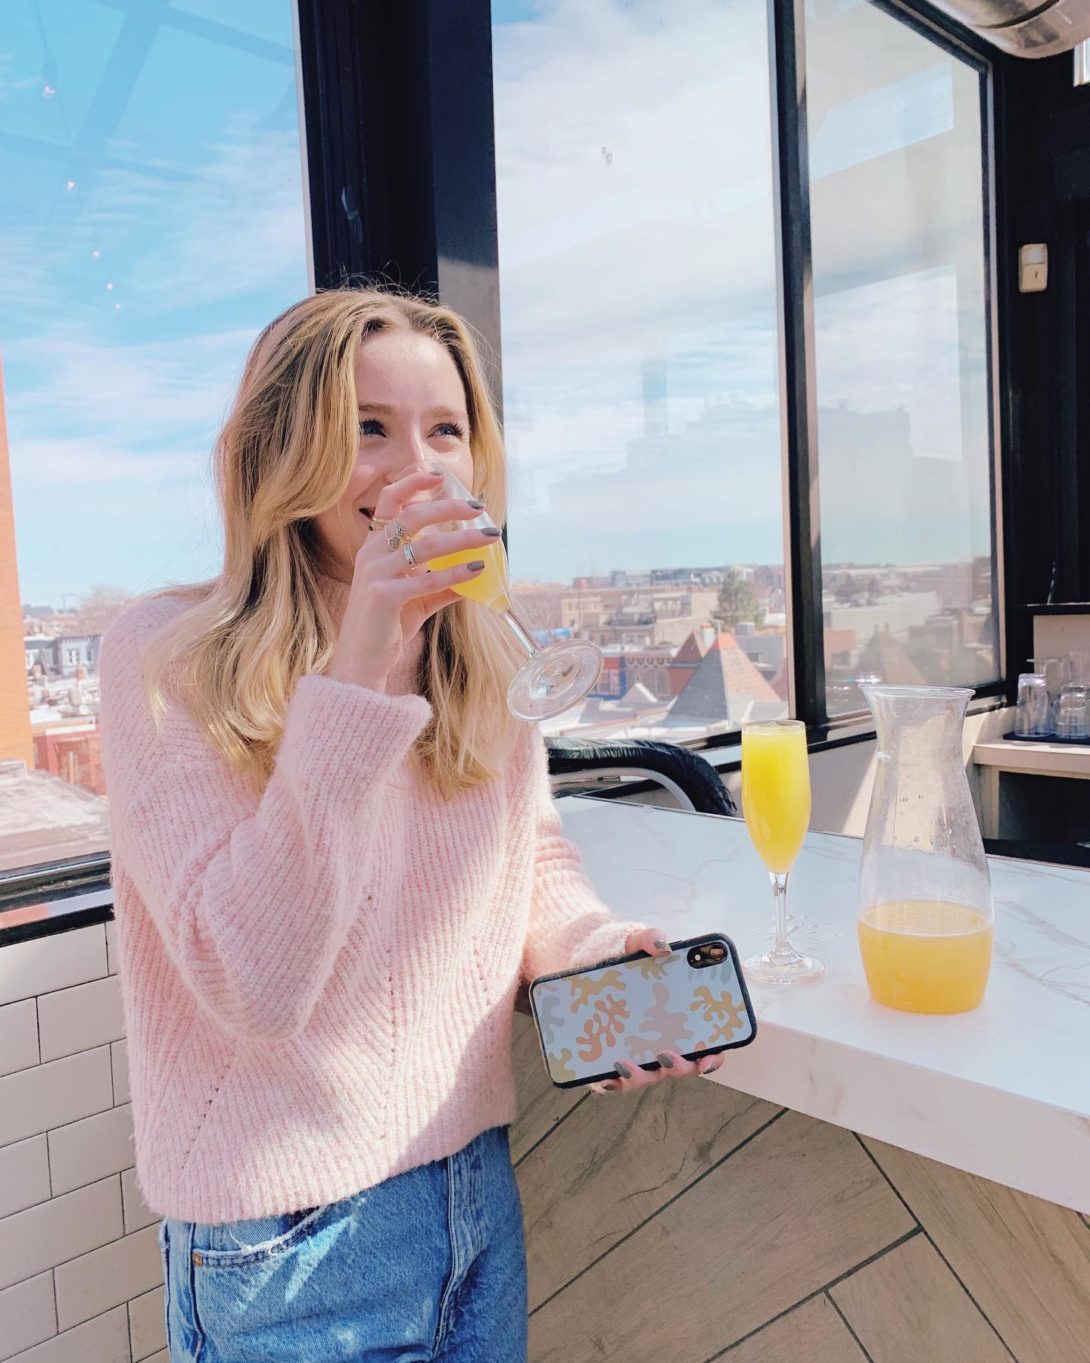 Mimosas and brunch featuring our #matisse inspired biodegradable case 🥂 Get yours now on https://casesbykate.com/ #case #phonecase #trending #dcbrunch